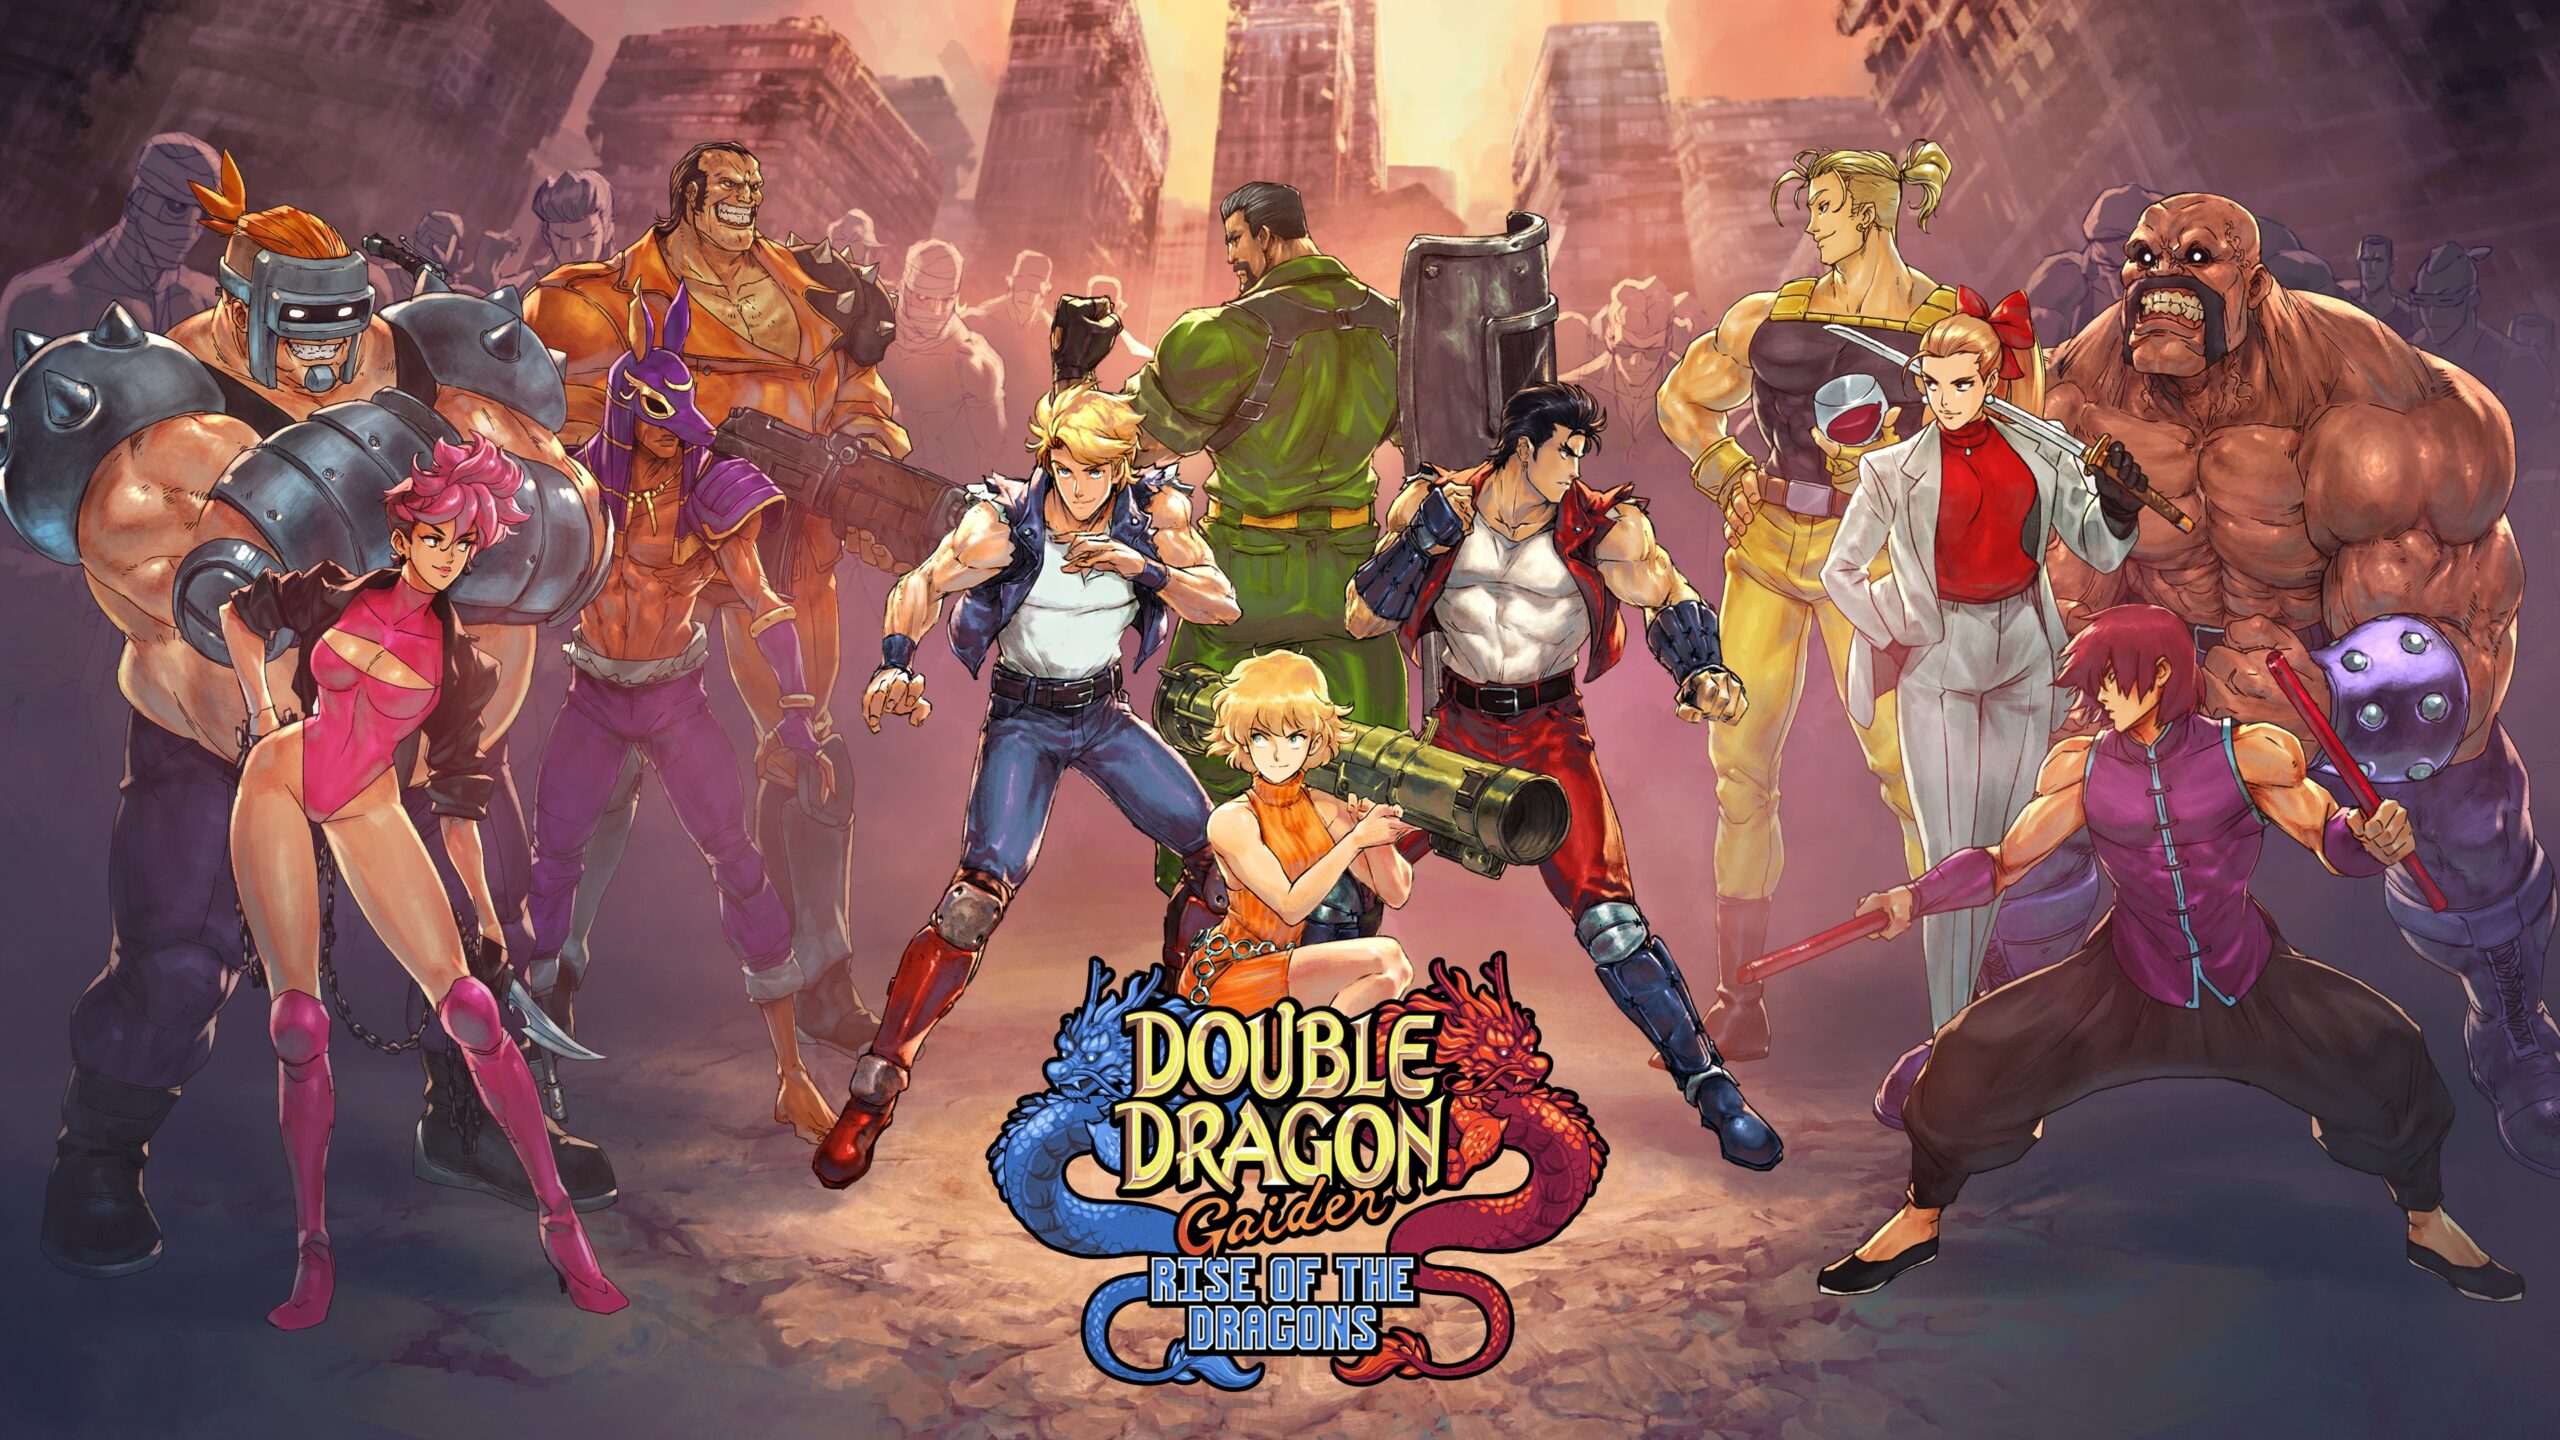 Double Dragon Gaiden: Rise Of The Dragons Review - Simple and